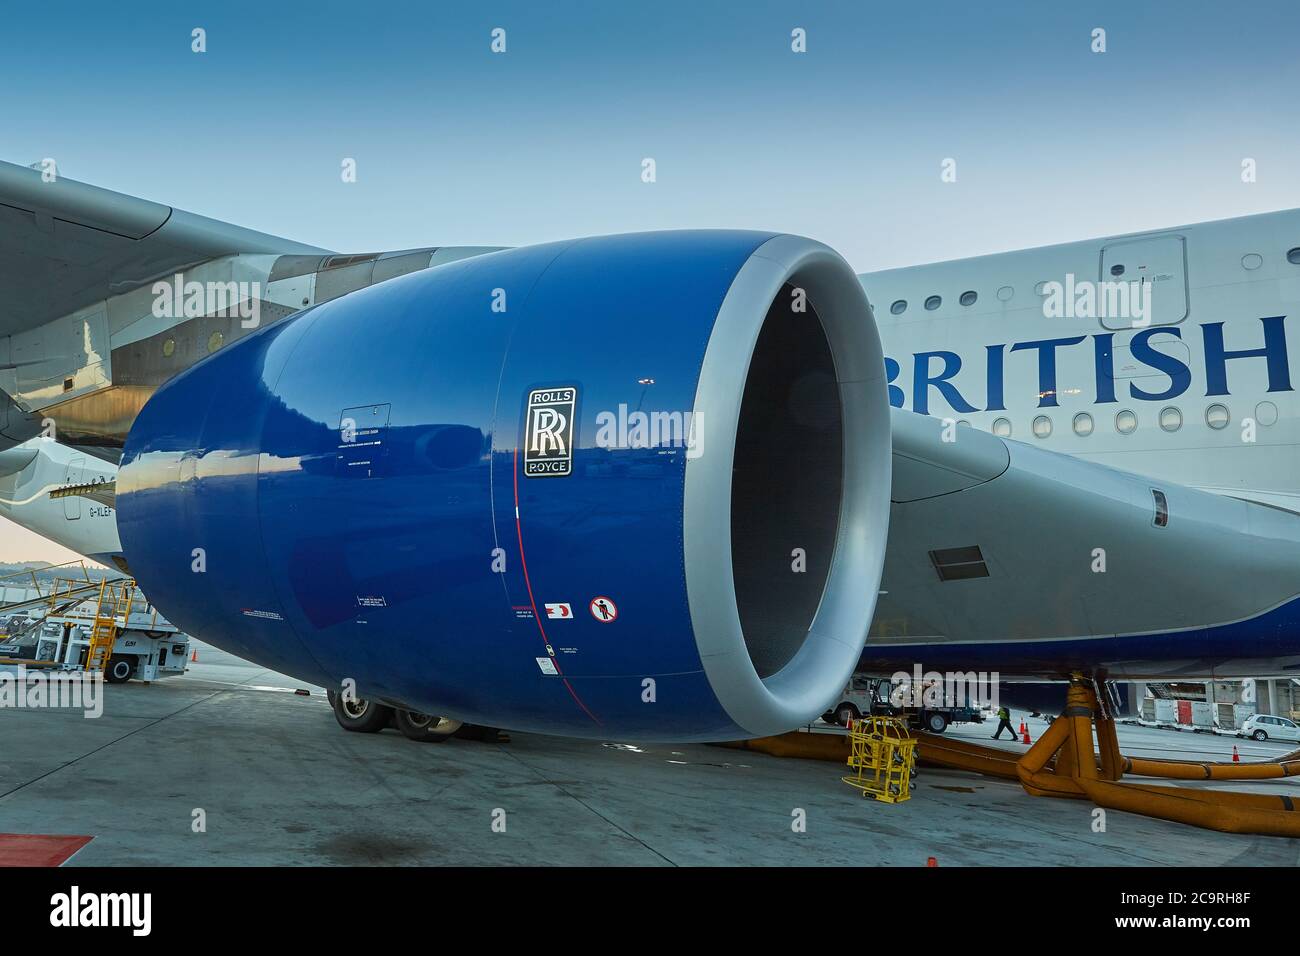 The Rolls Royce Trent 900 Jet Engine Of A British Airways Airbus A380 On The Ground At San Francisco International Airport, California, USA. Stock Photo